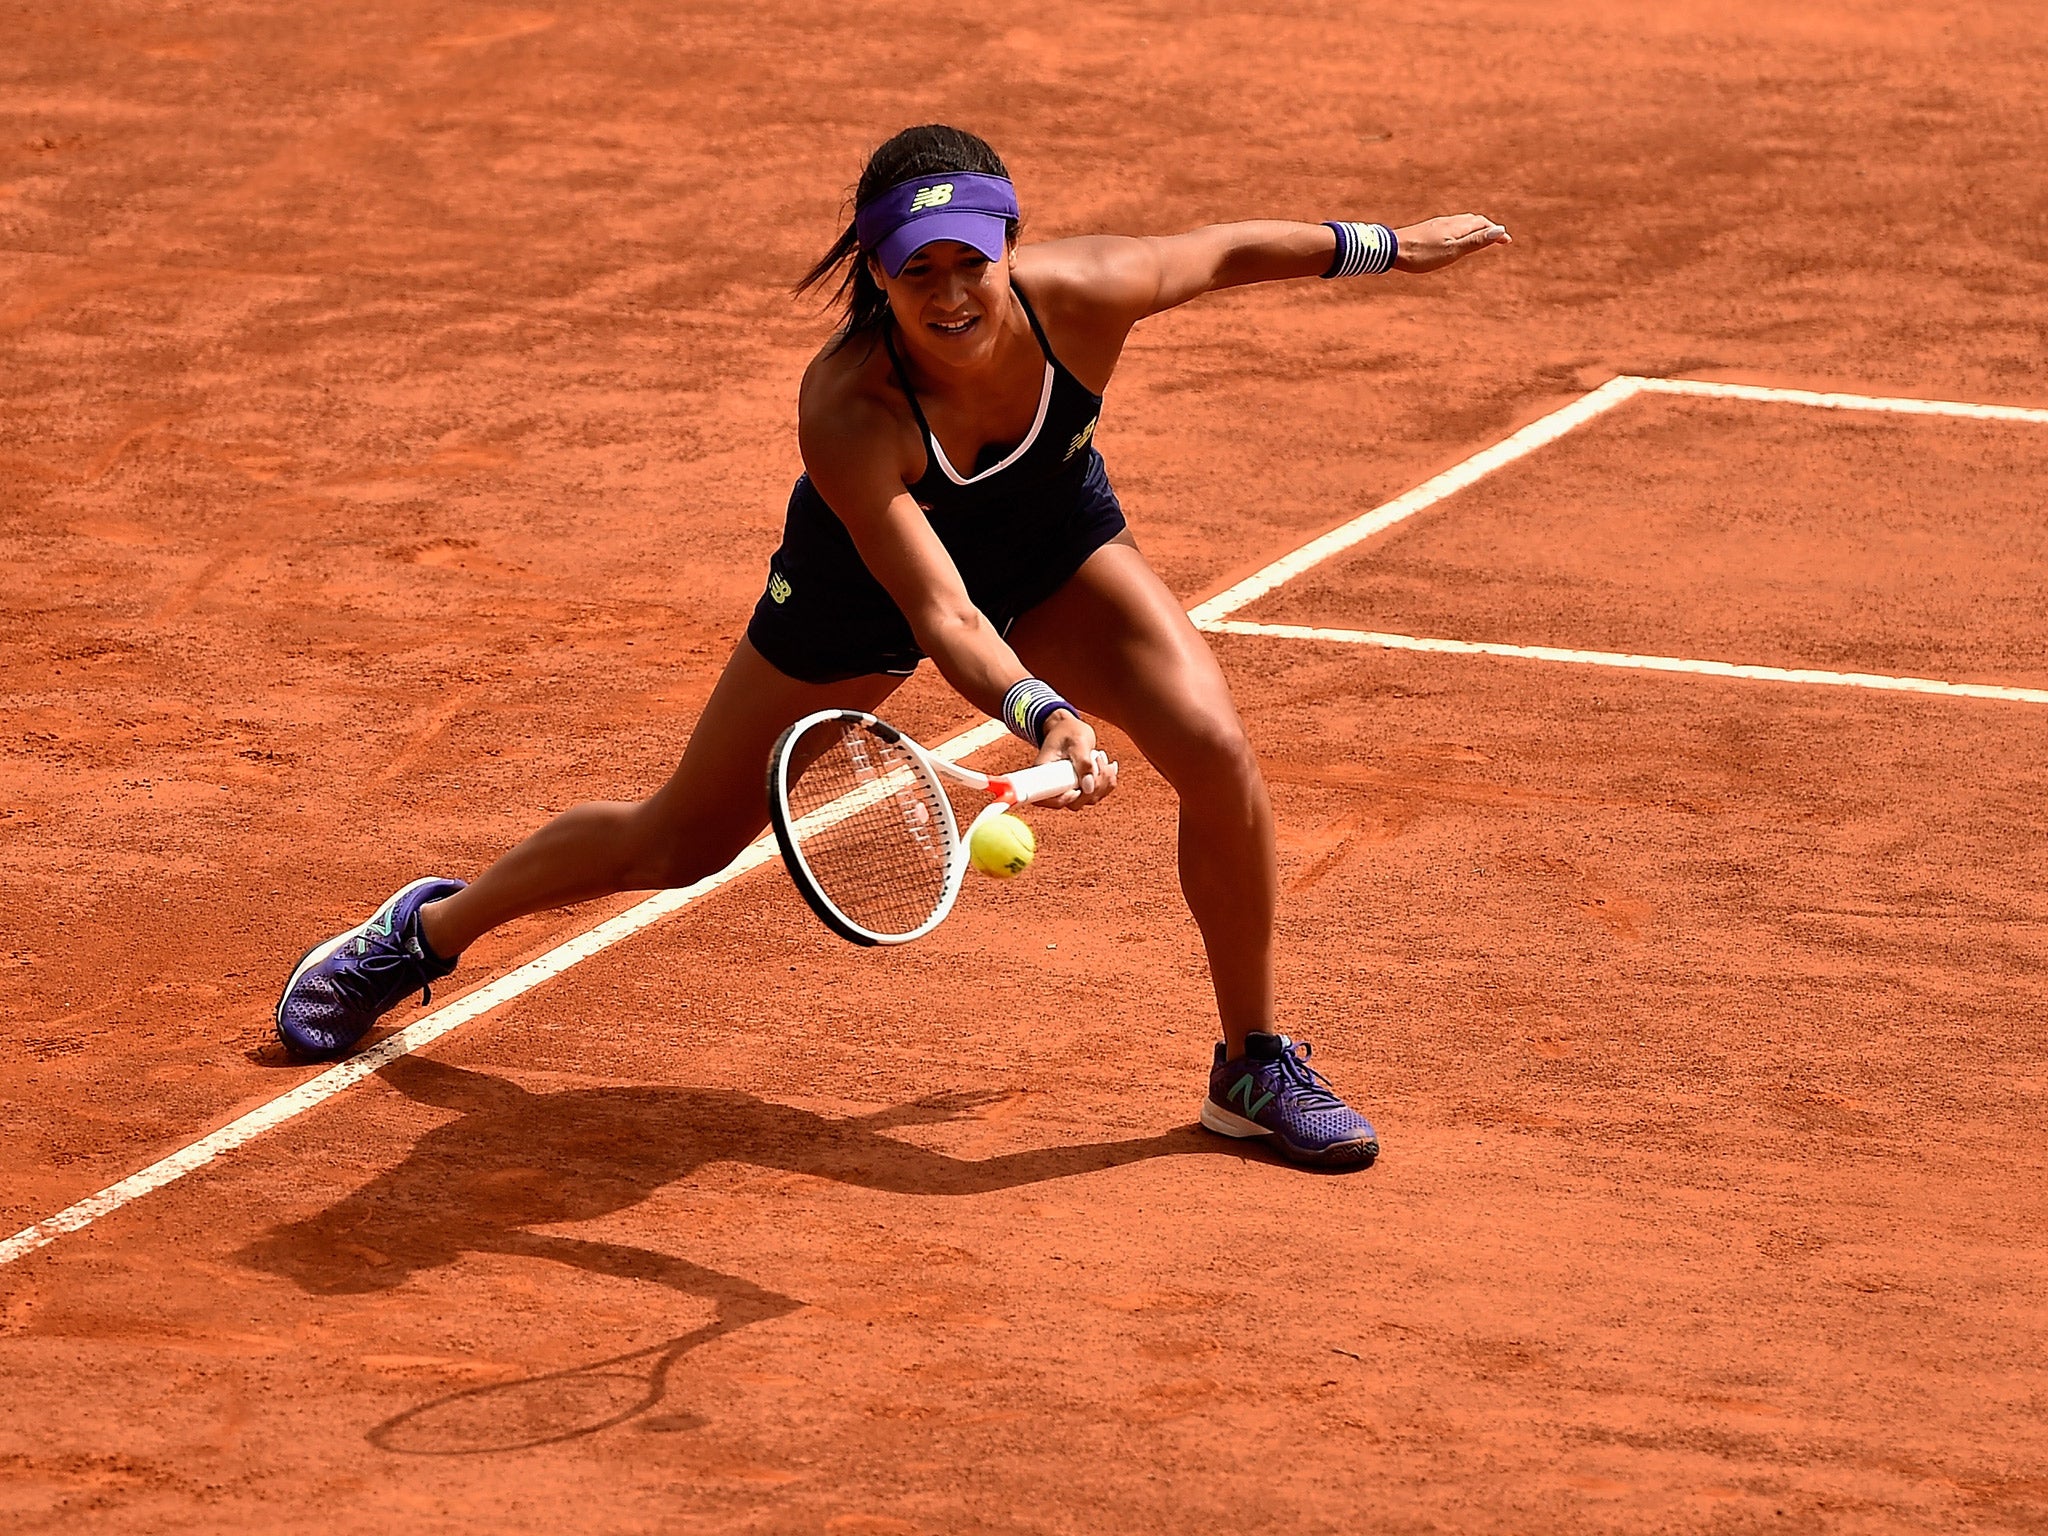 Heather Watson suffered a 6-4, 6-2 defeat by Barbora Strycova in Rome